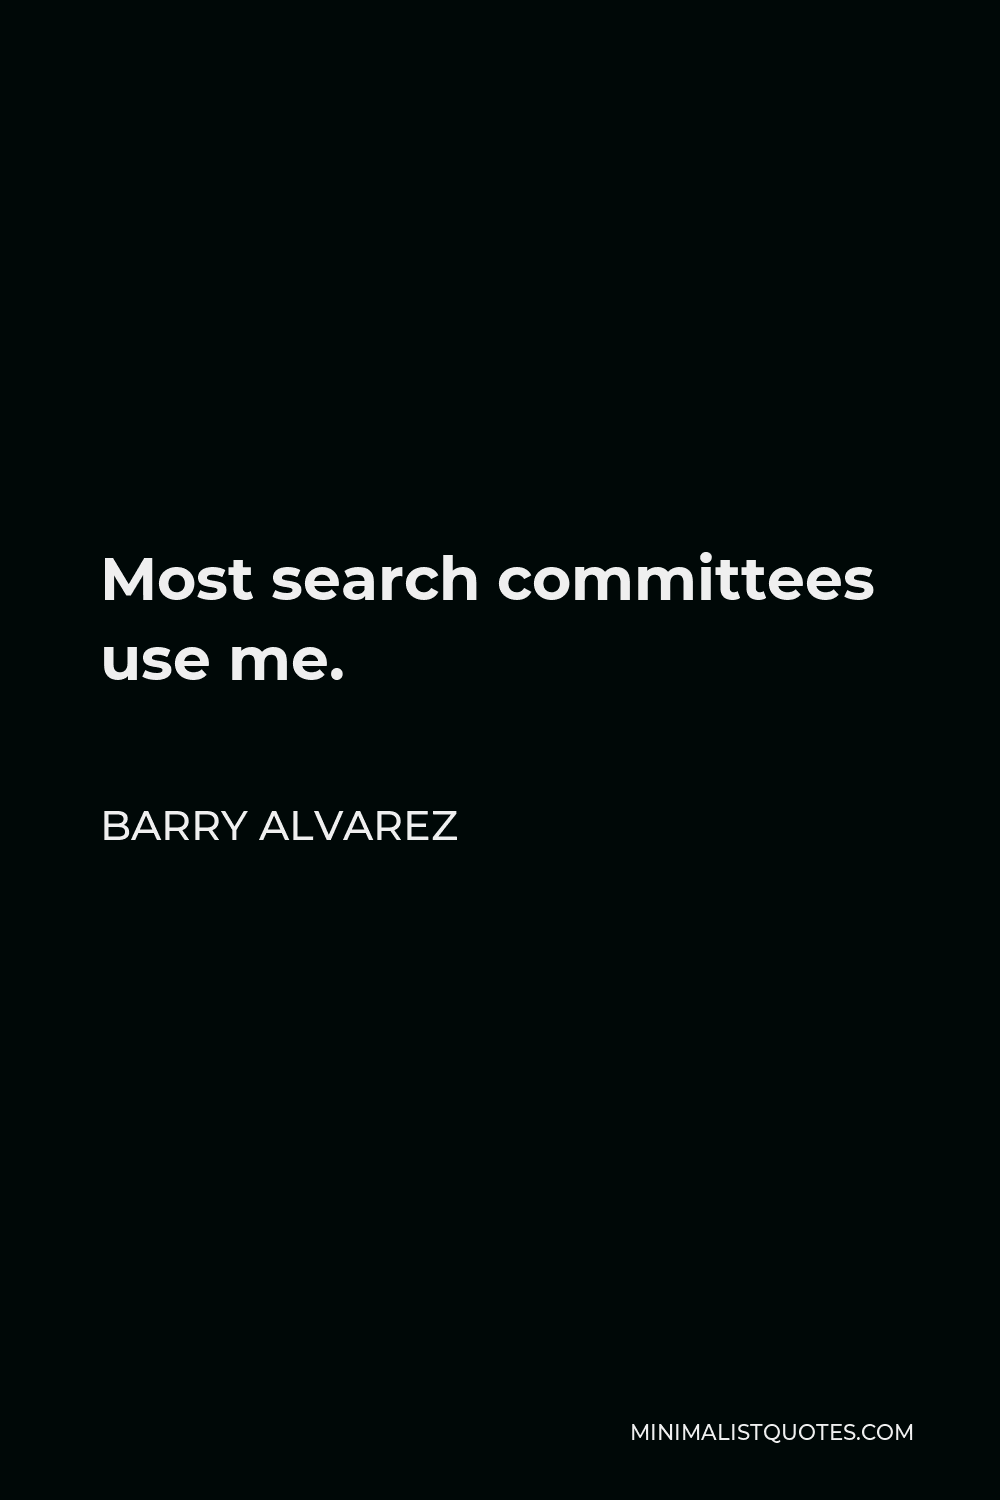 Barry Alvarez Quote - Most search committees use me.